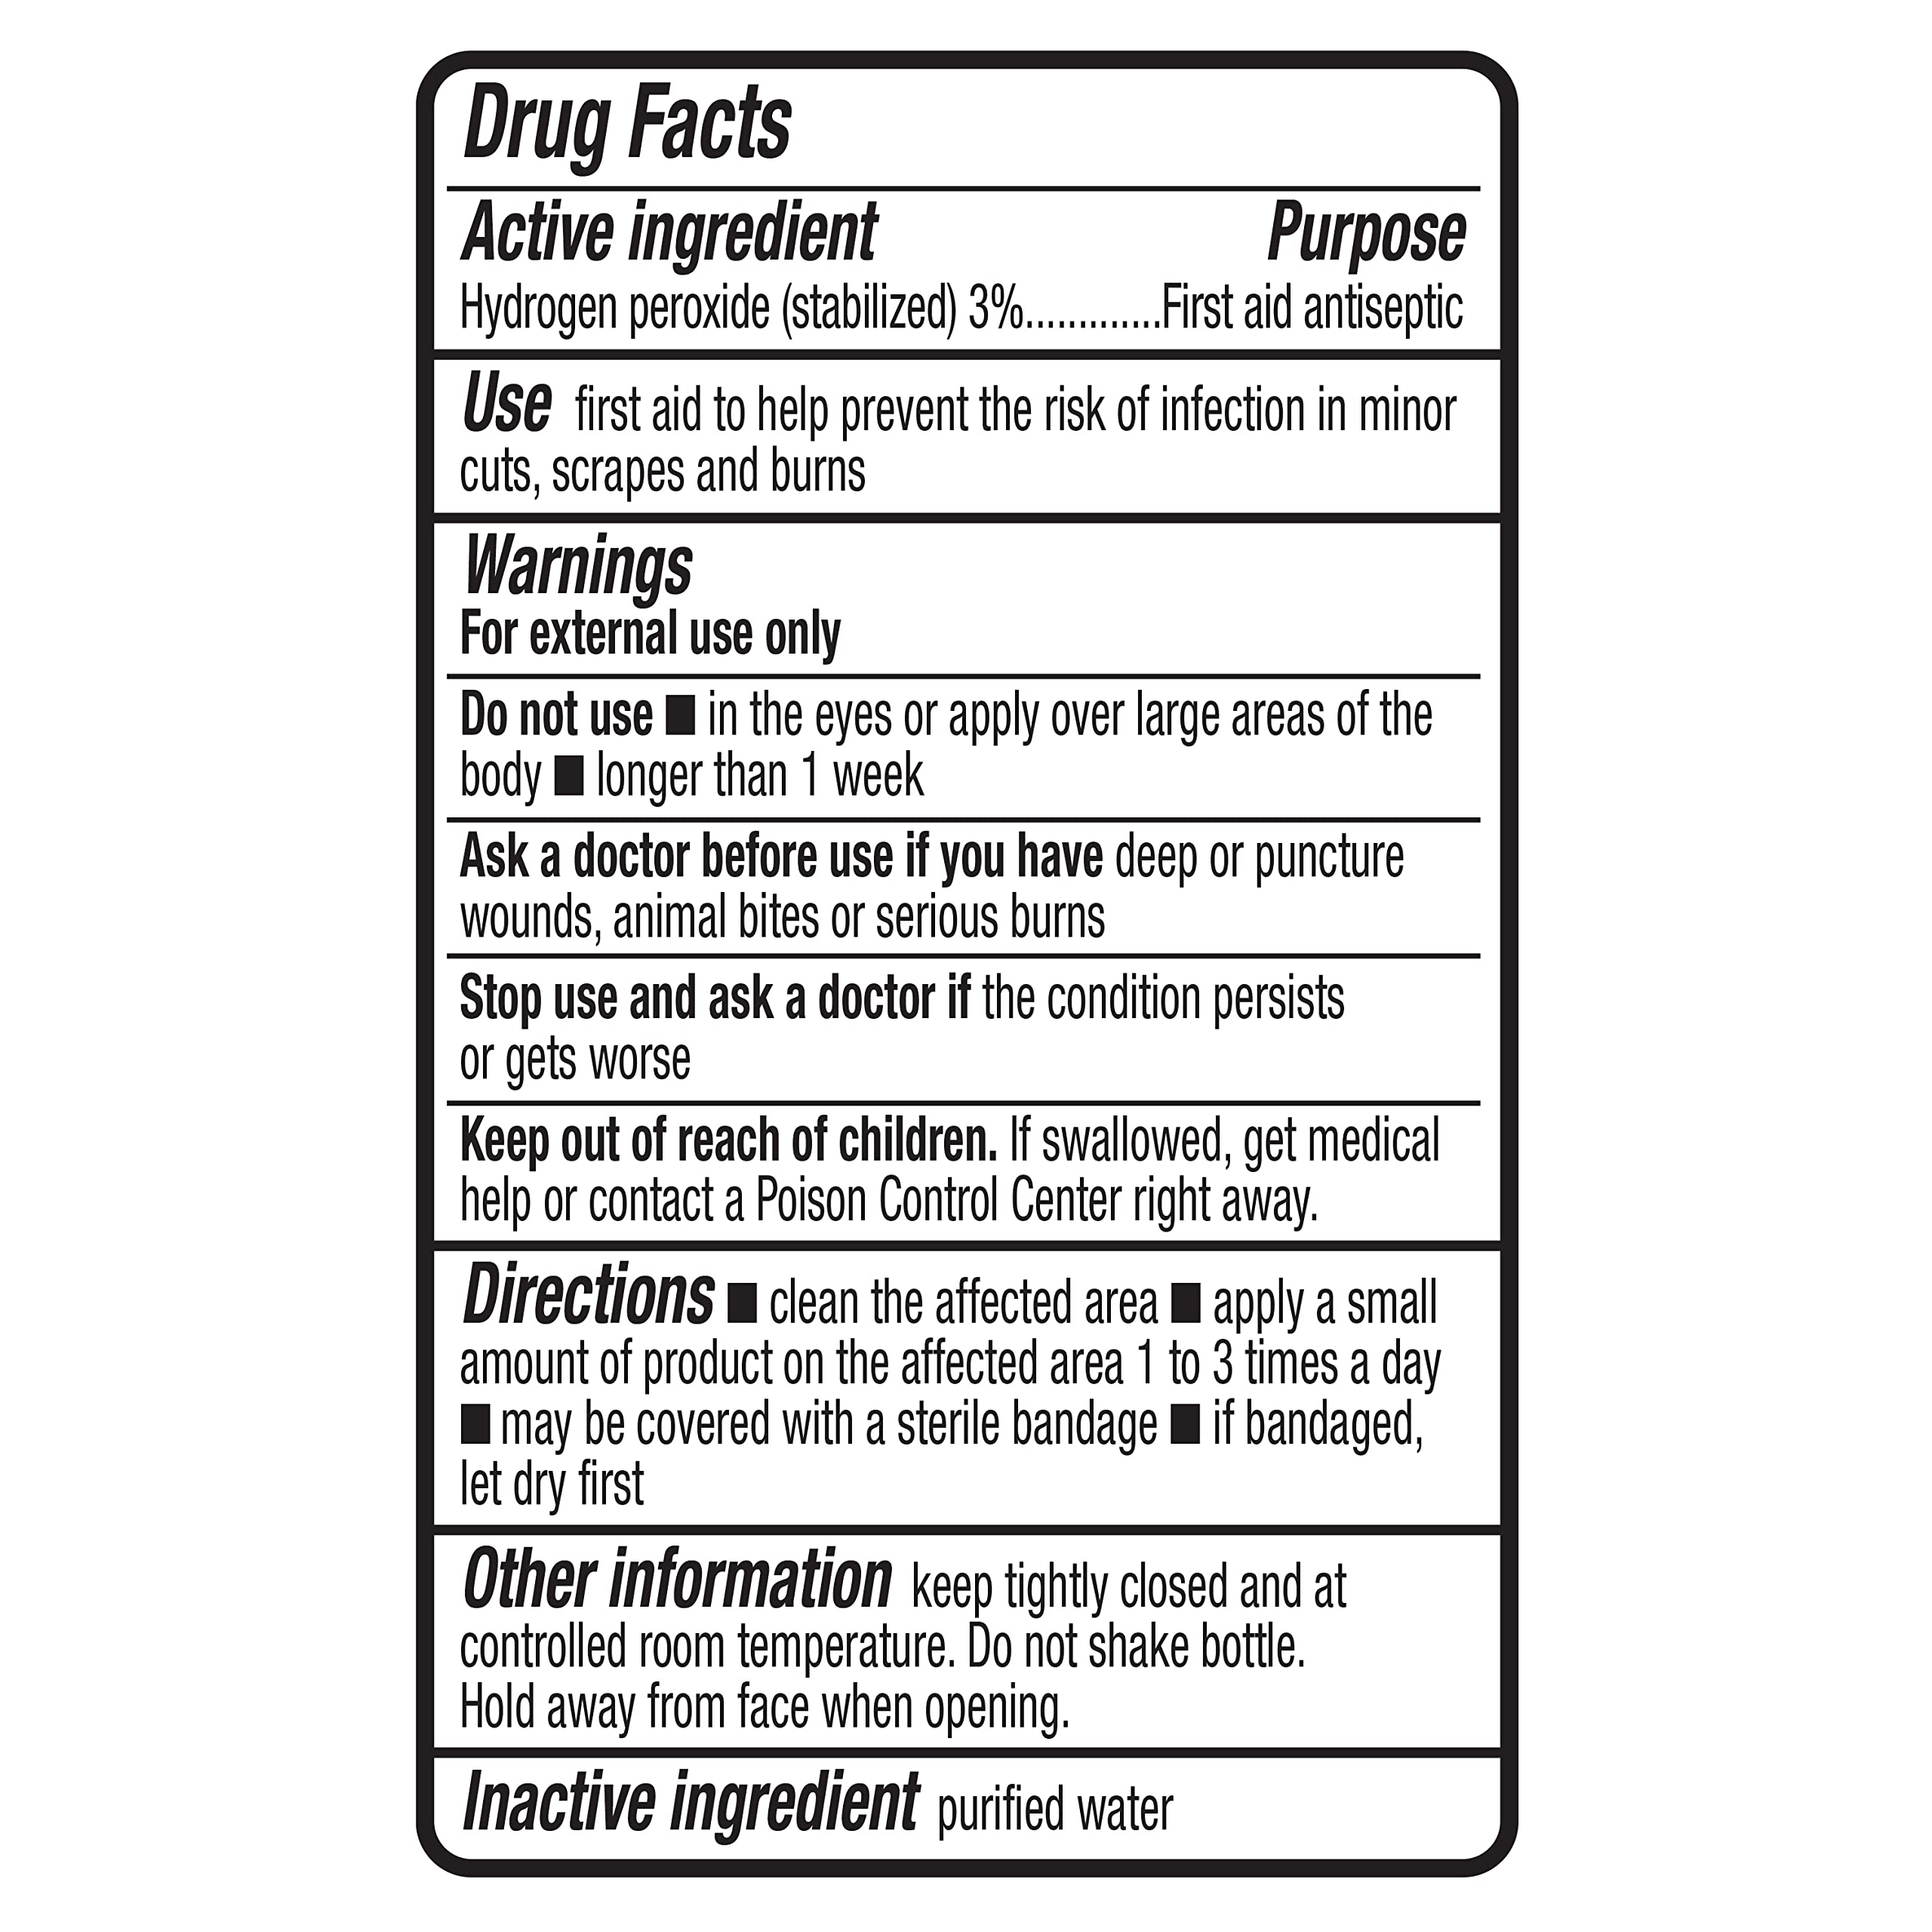 Amazon Basics Hydrogen Peroxide Topical Solution USP, 16 Fl Oz (Pack of 1) (Previously Solimo)